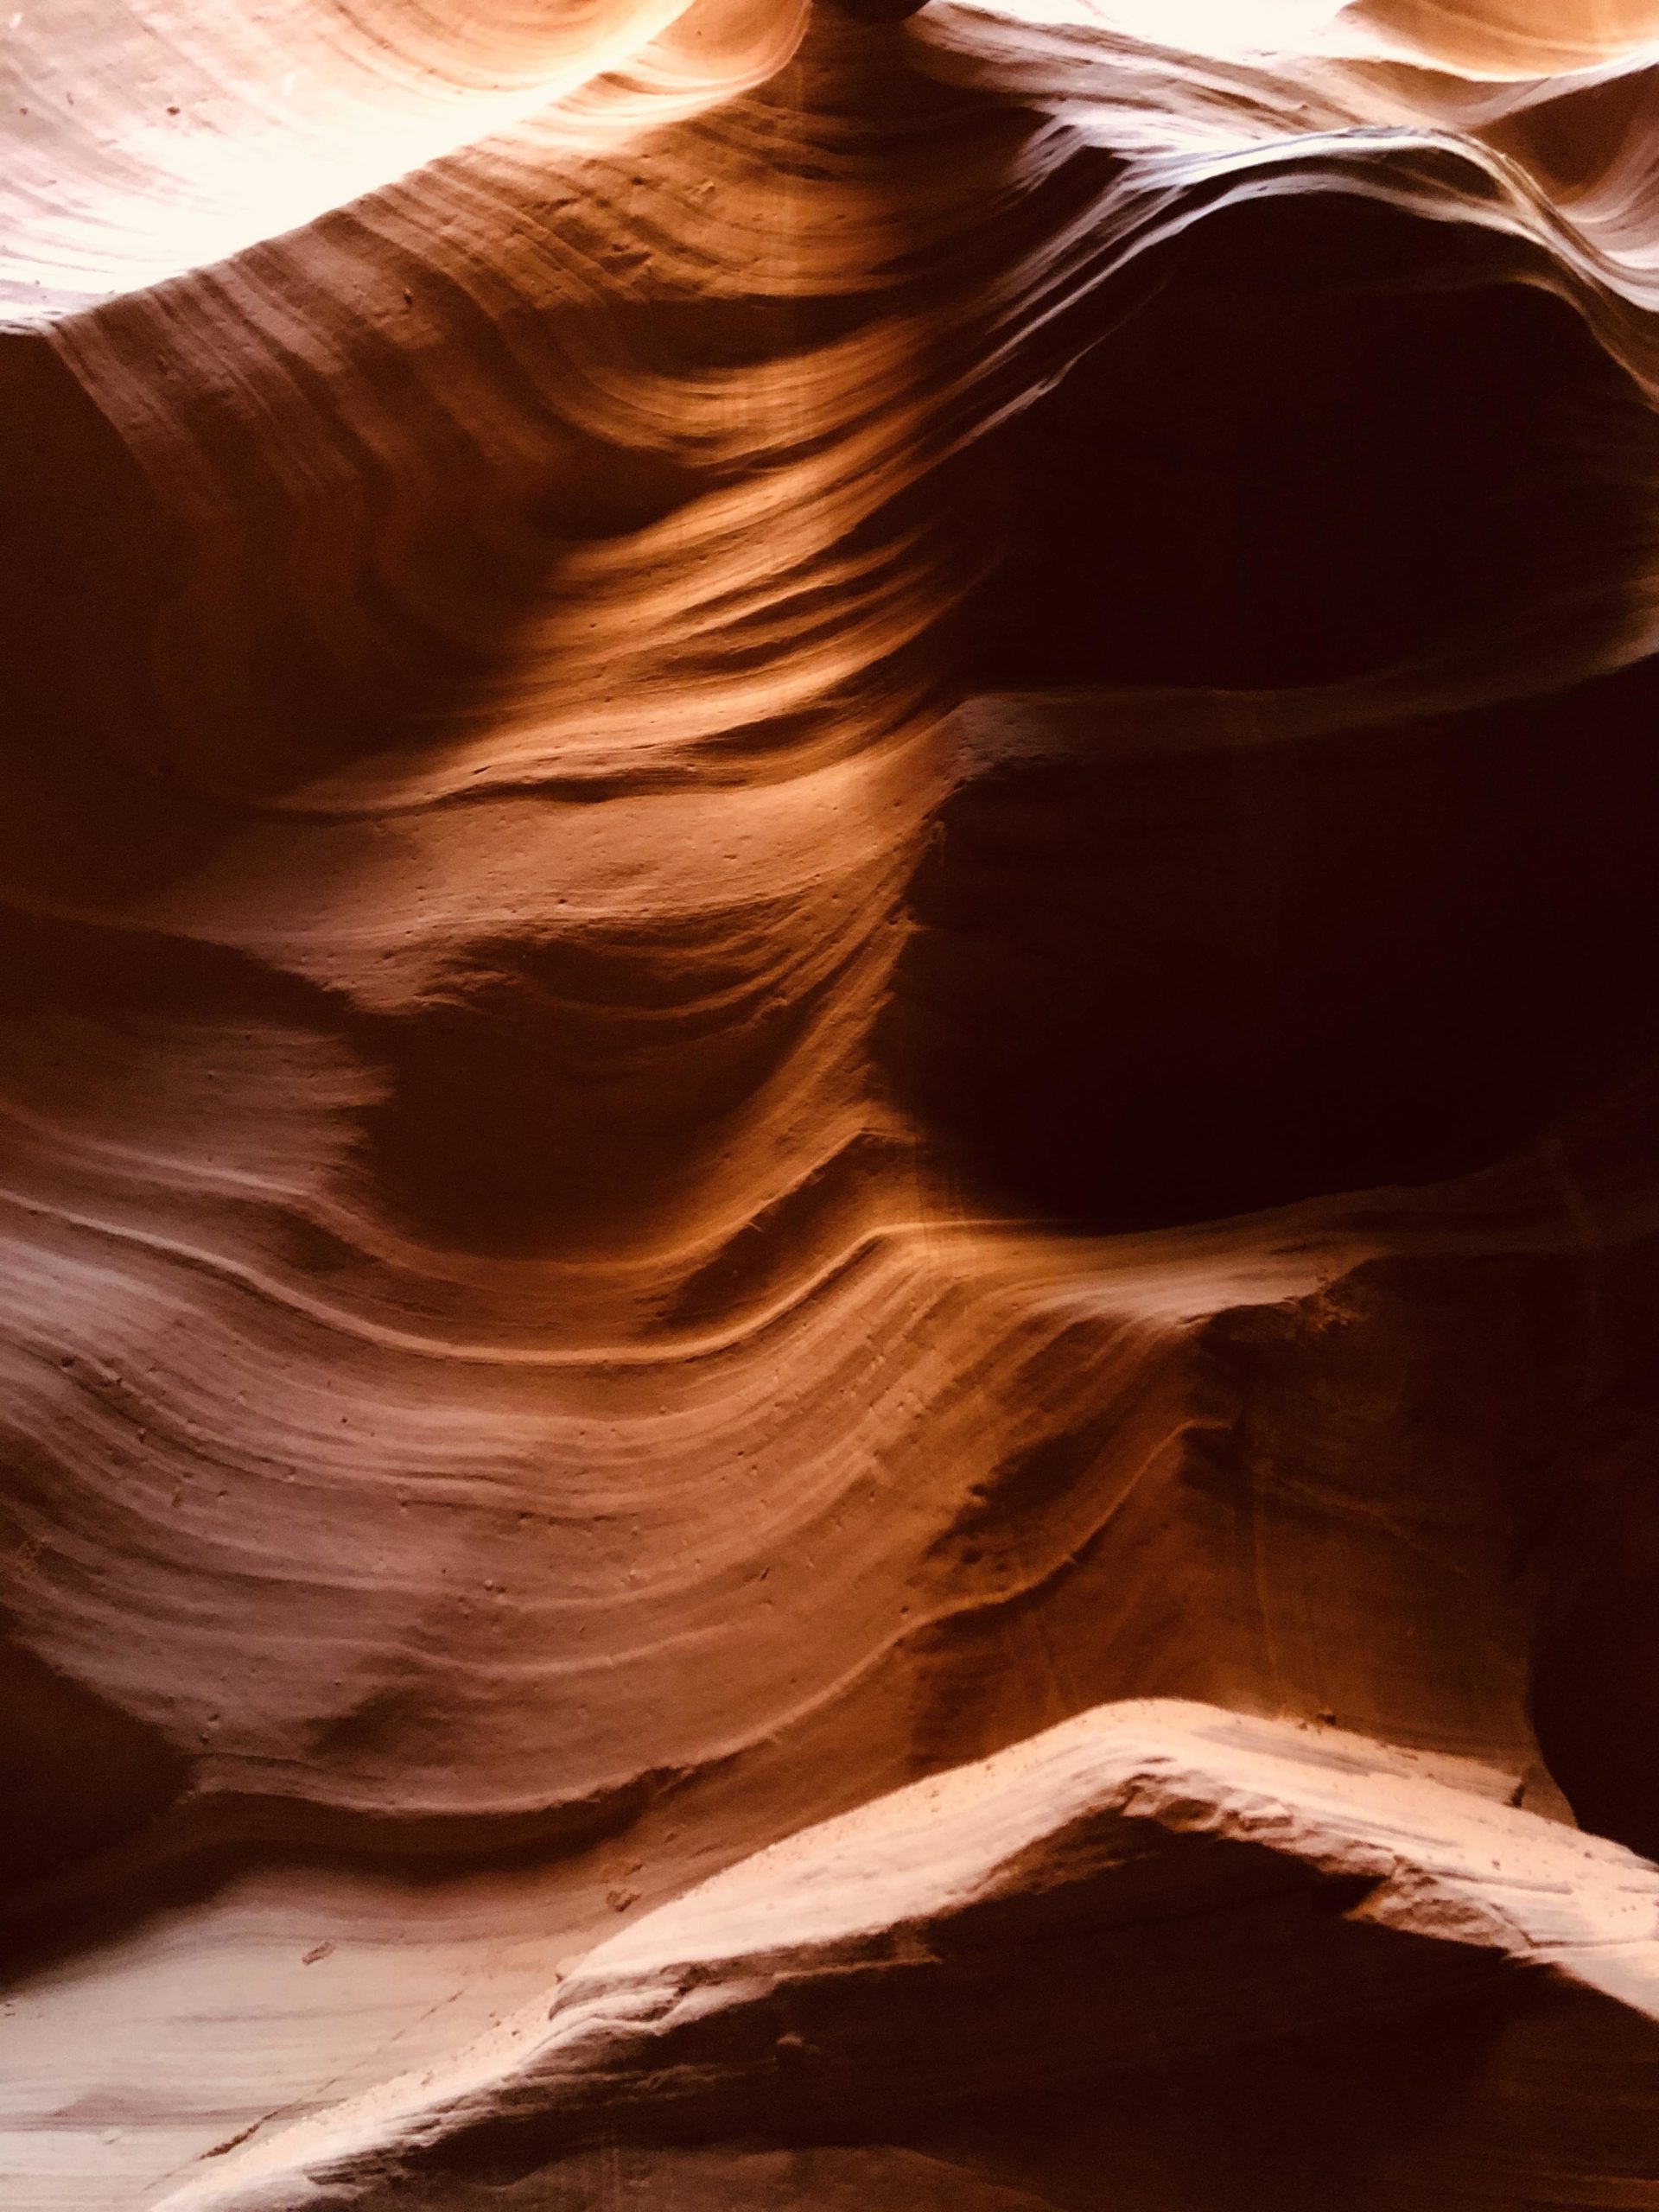 Do I need reservations at Antelope Canyon?